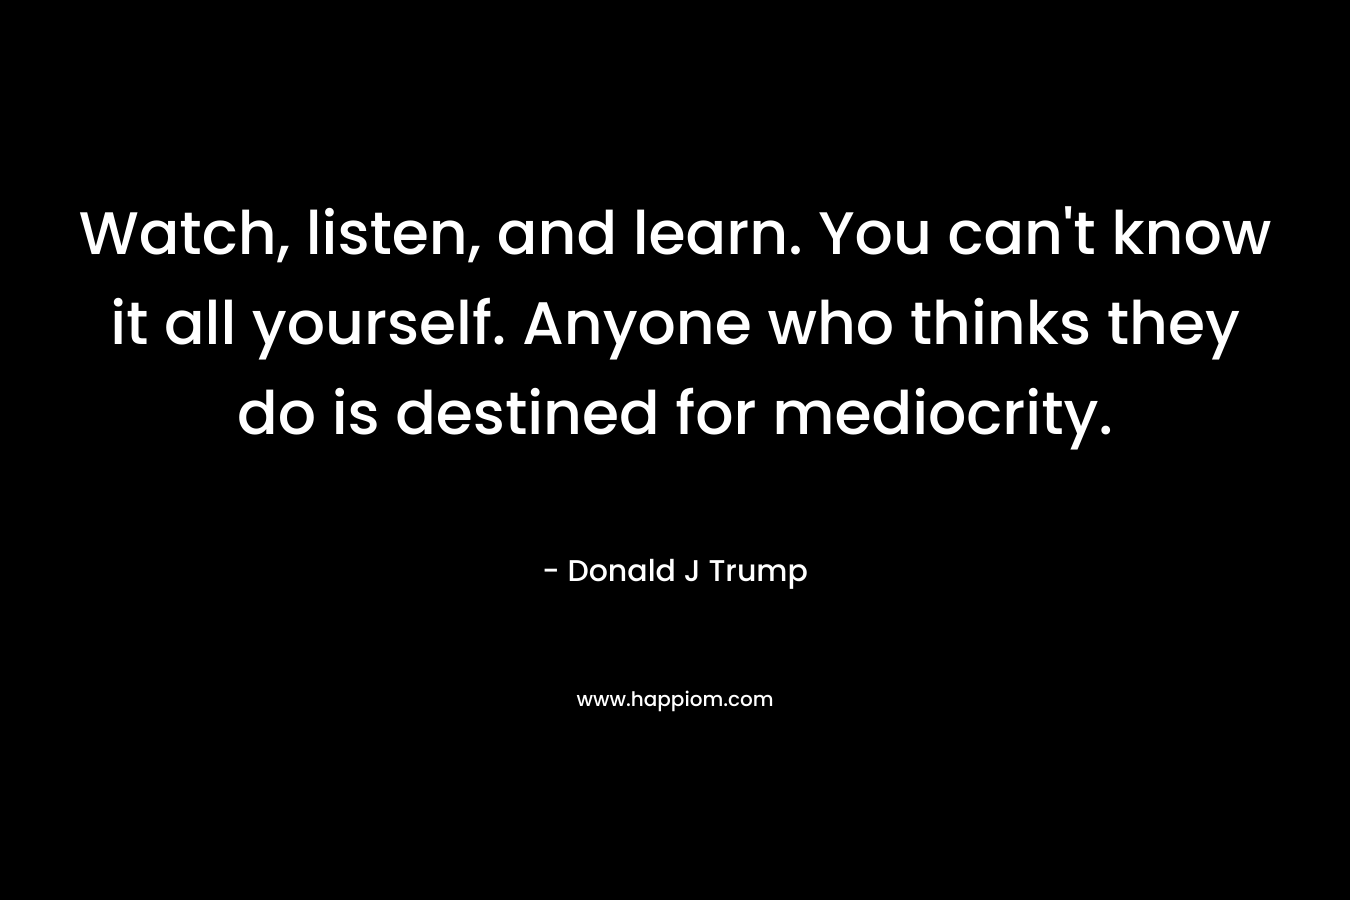 Watch, listen, and learn. You can’t know it all yourself. Anyone who thinks they do is destined for mediocrity. – Donald J Trump